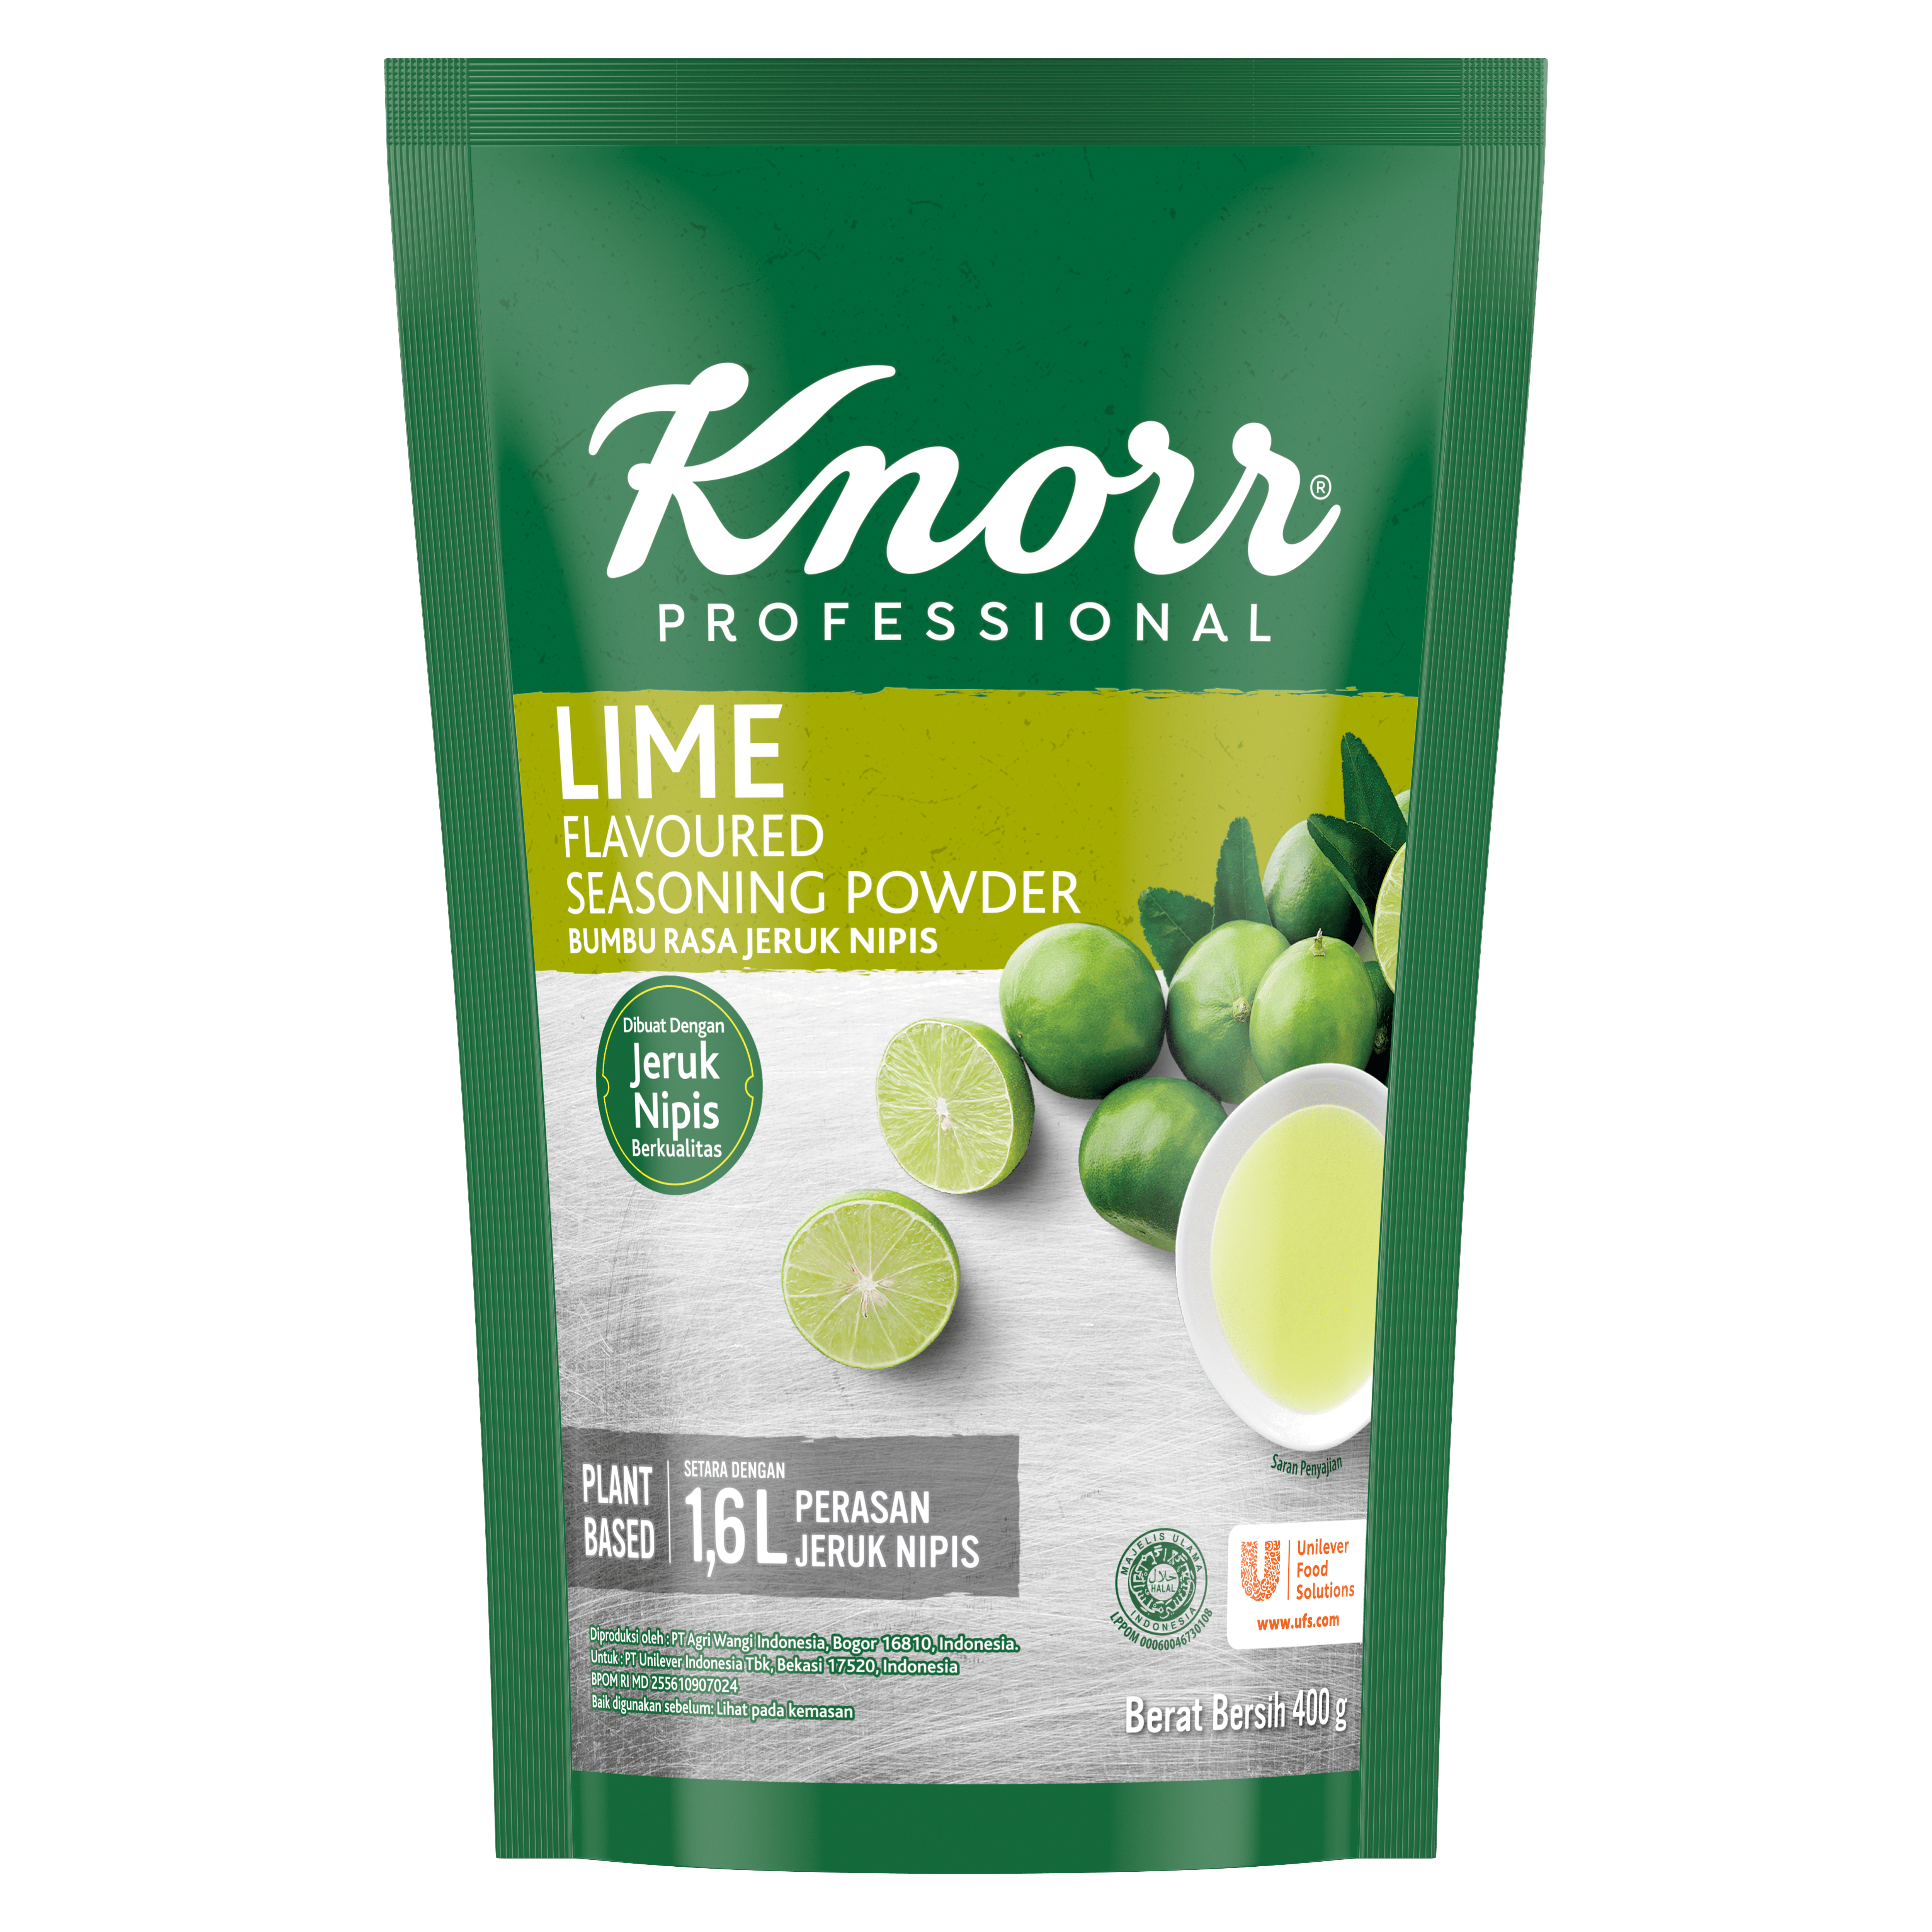 Knorr Lime Powder 400g - Knorr Lime Powder, top quality lime in easy to use powder format for multiple applications.